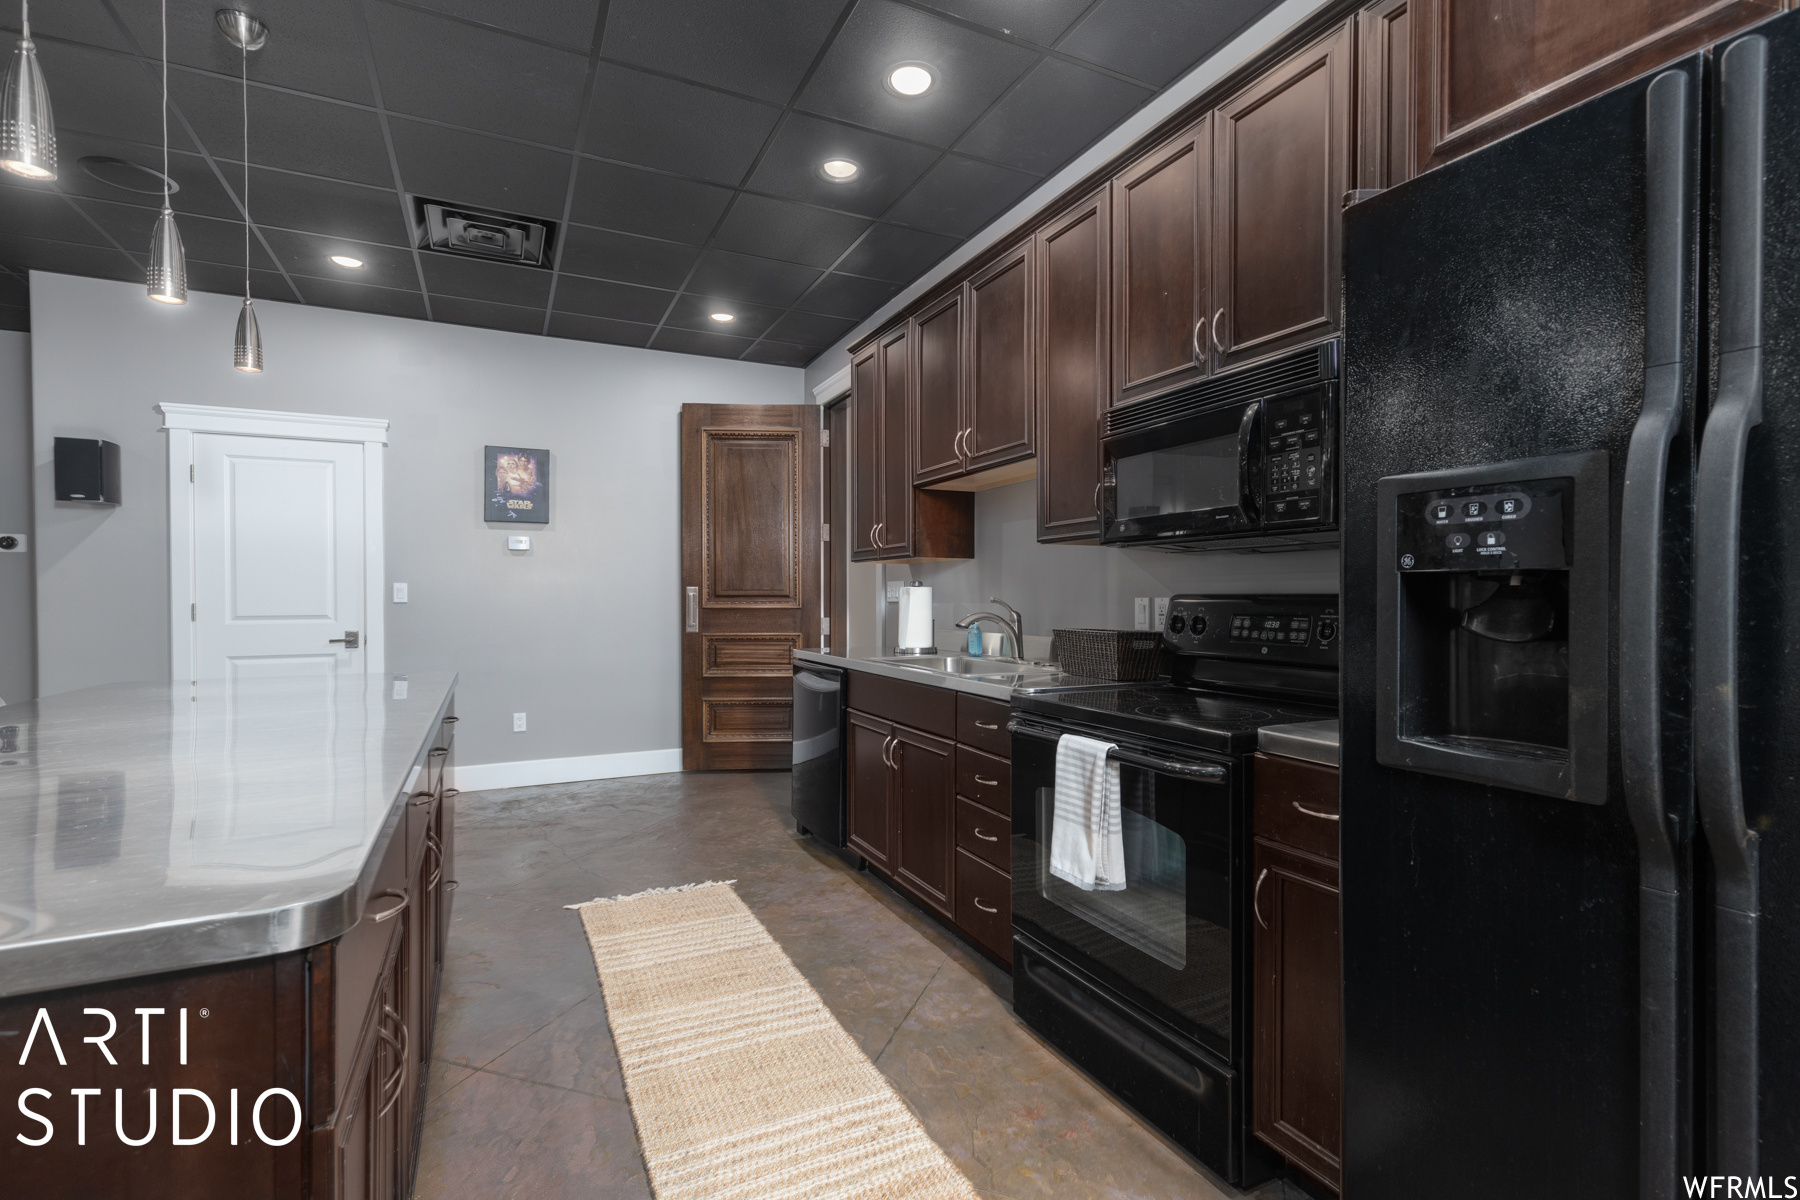 Theater room kitchen featuring black appliances, a paneled ceiling, dark brown cabinets, and sink